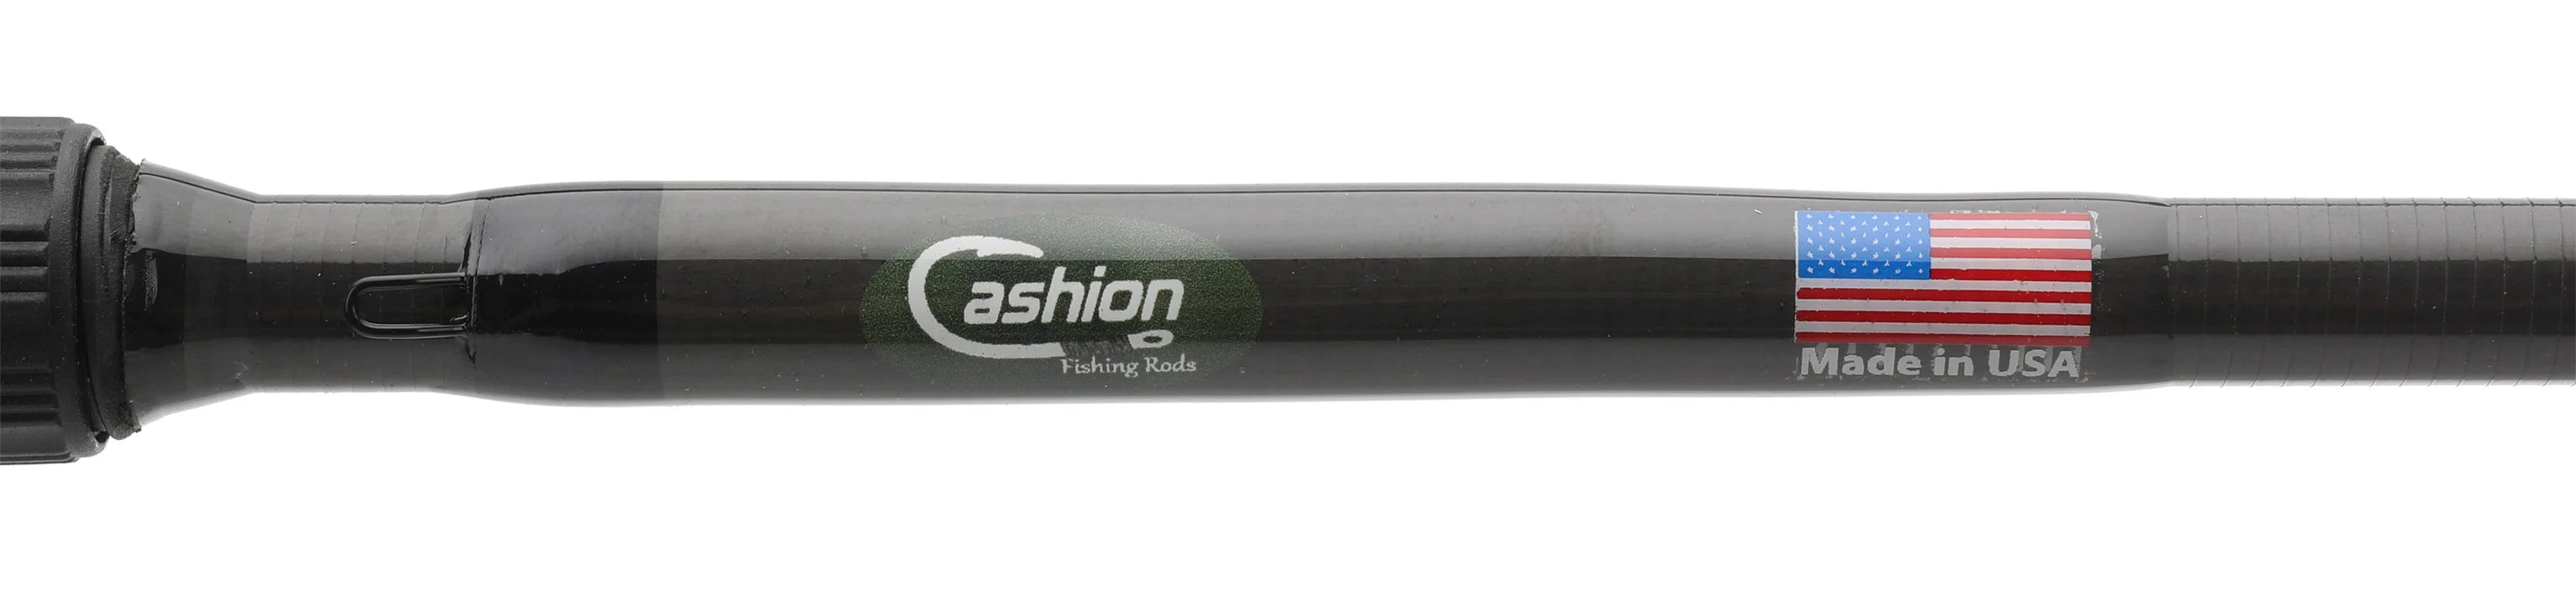 CASHION ICON FROG CASTING RODS